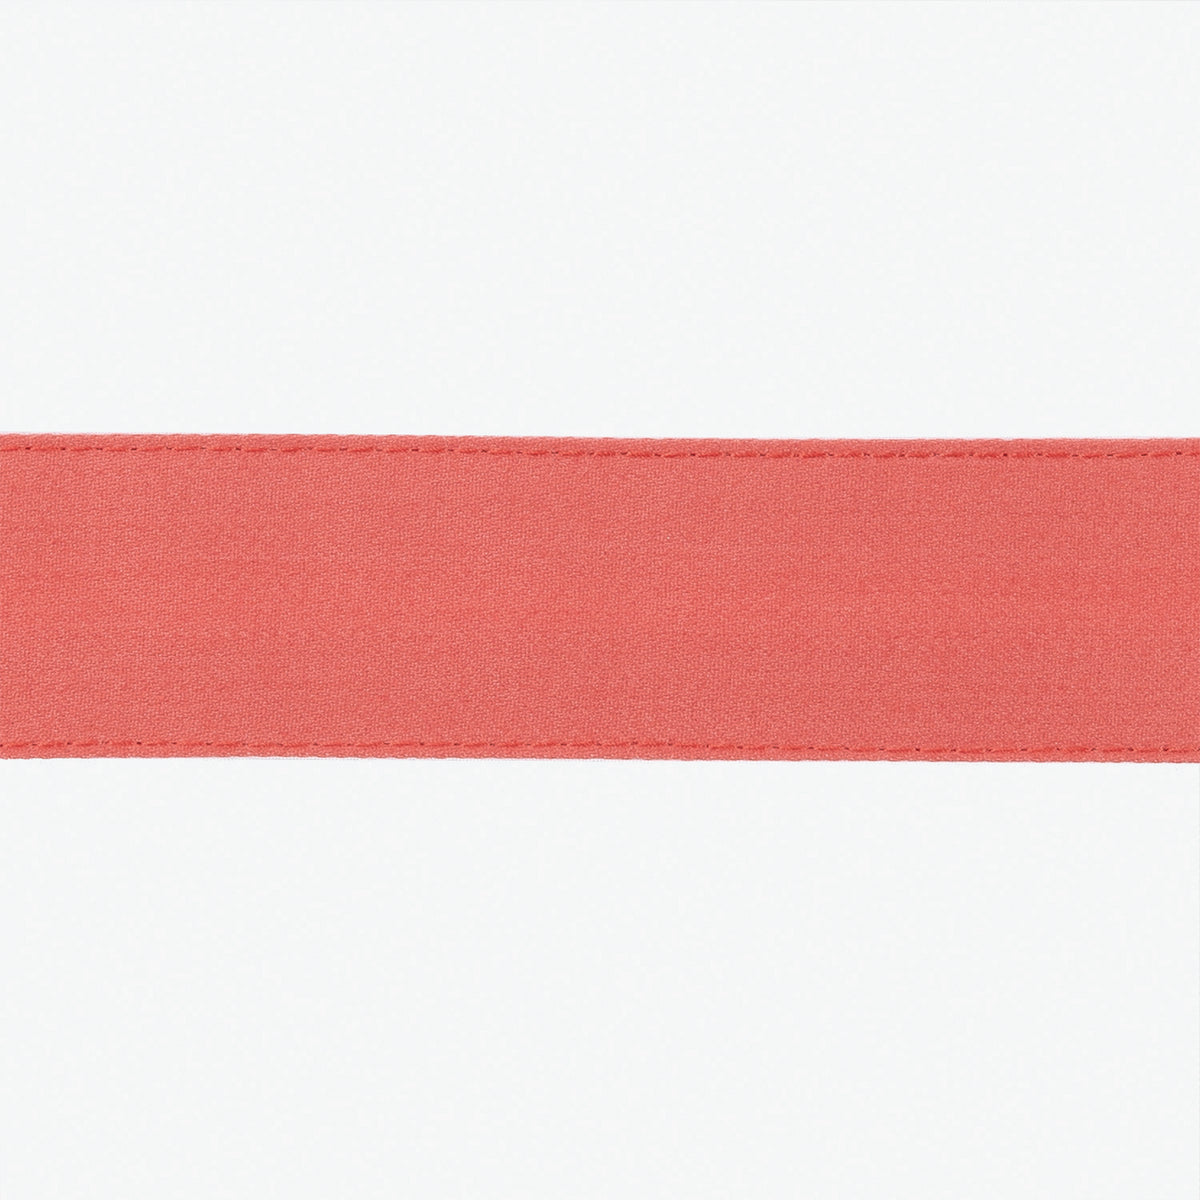 Swatch Sample of Matouk Lowell Tissue Box Cover in Color Coral